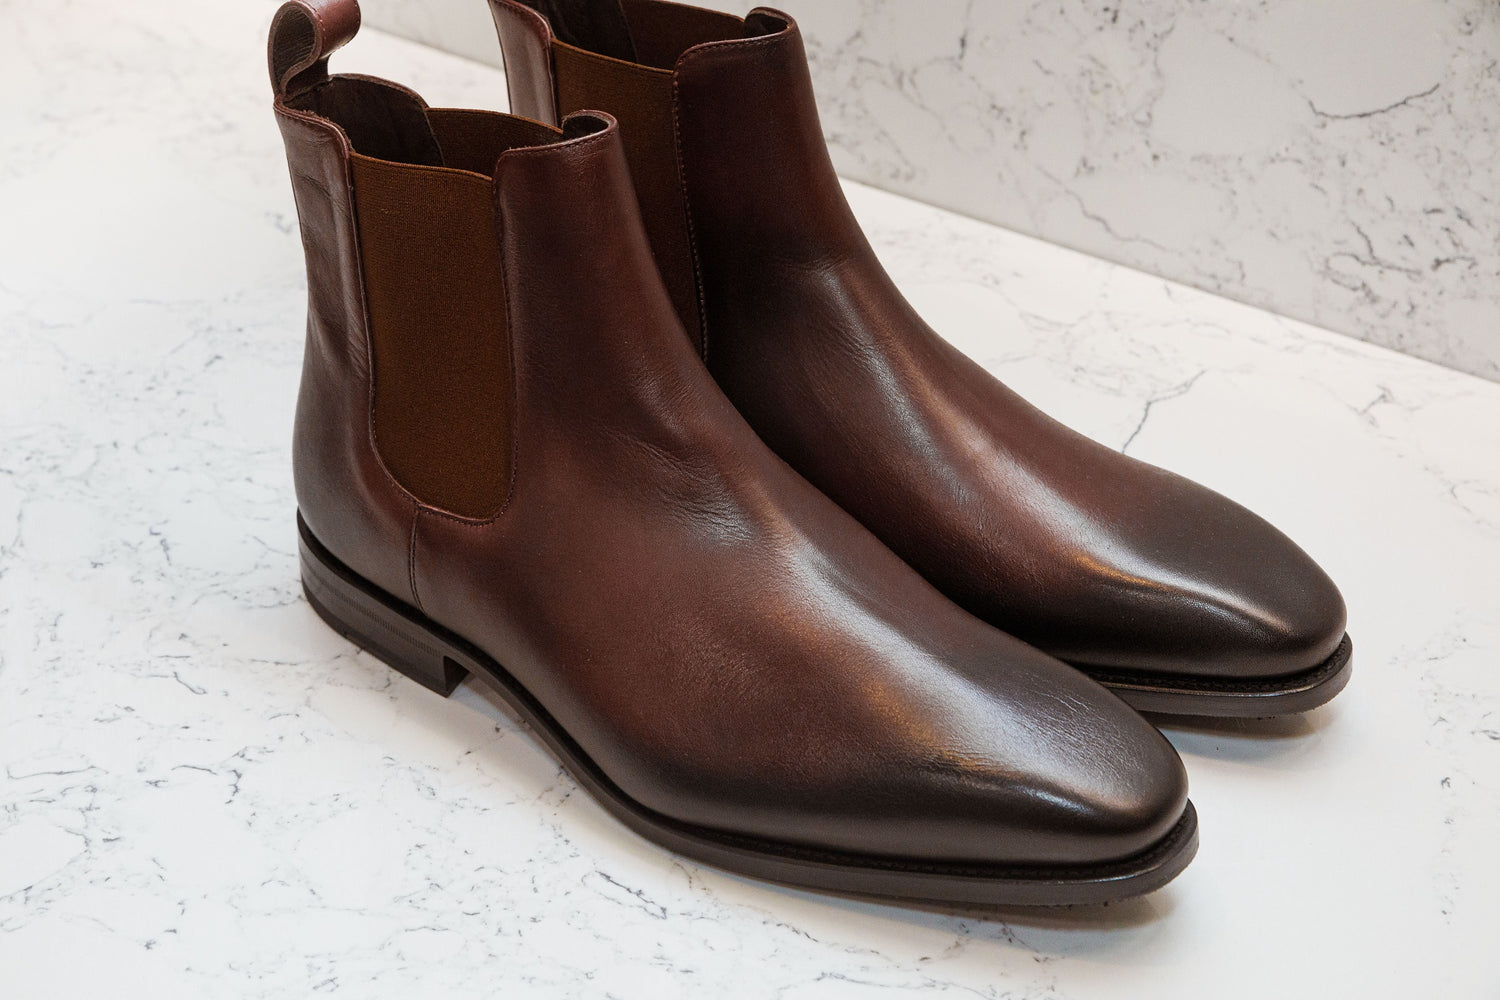 Burgundy Chelsea Boots - Boots by Urbbana